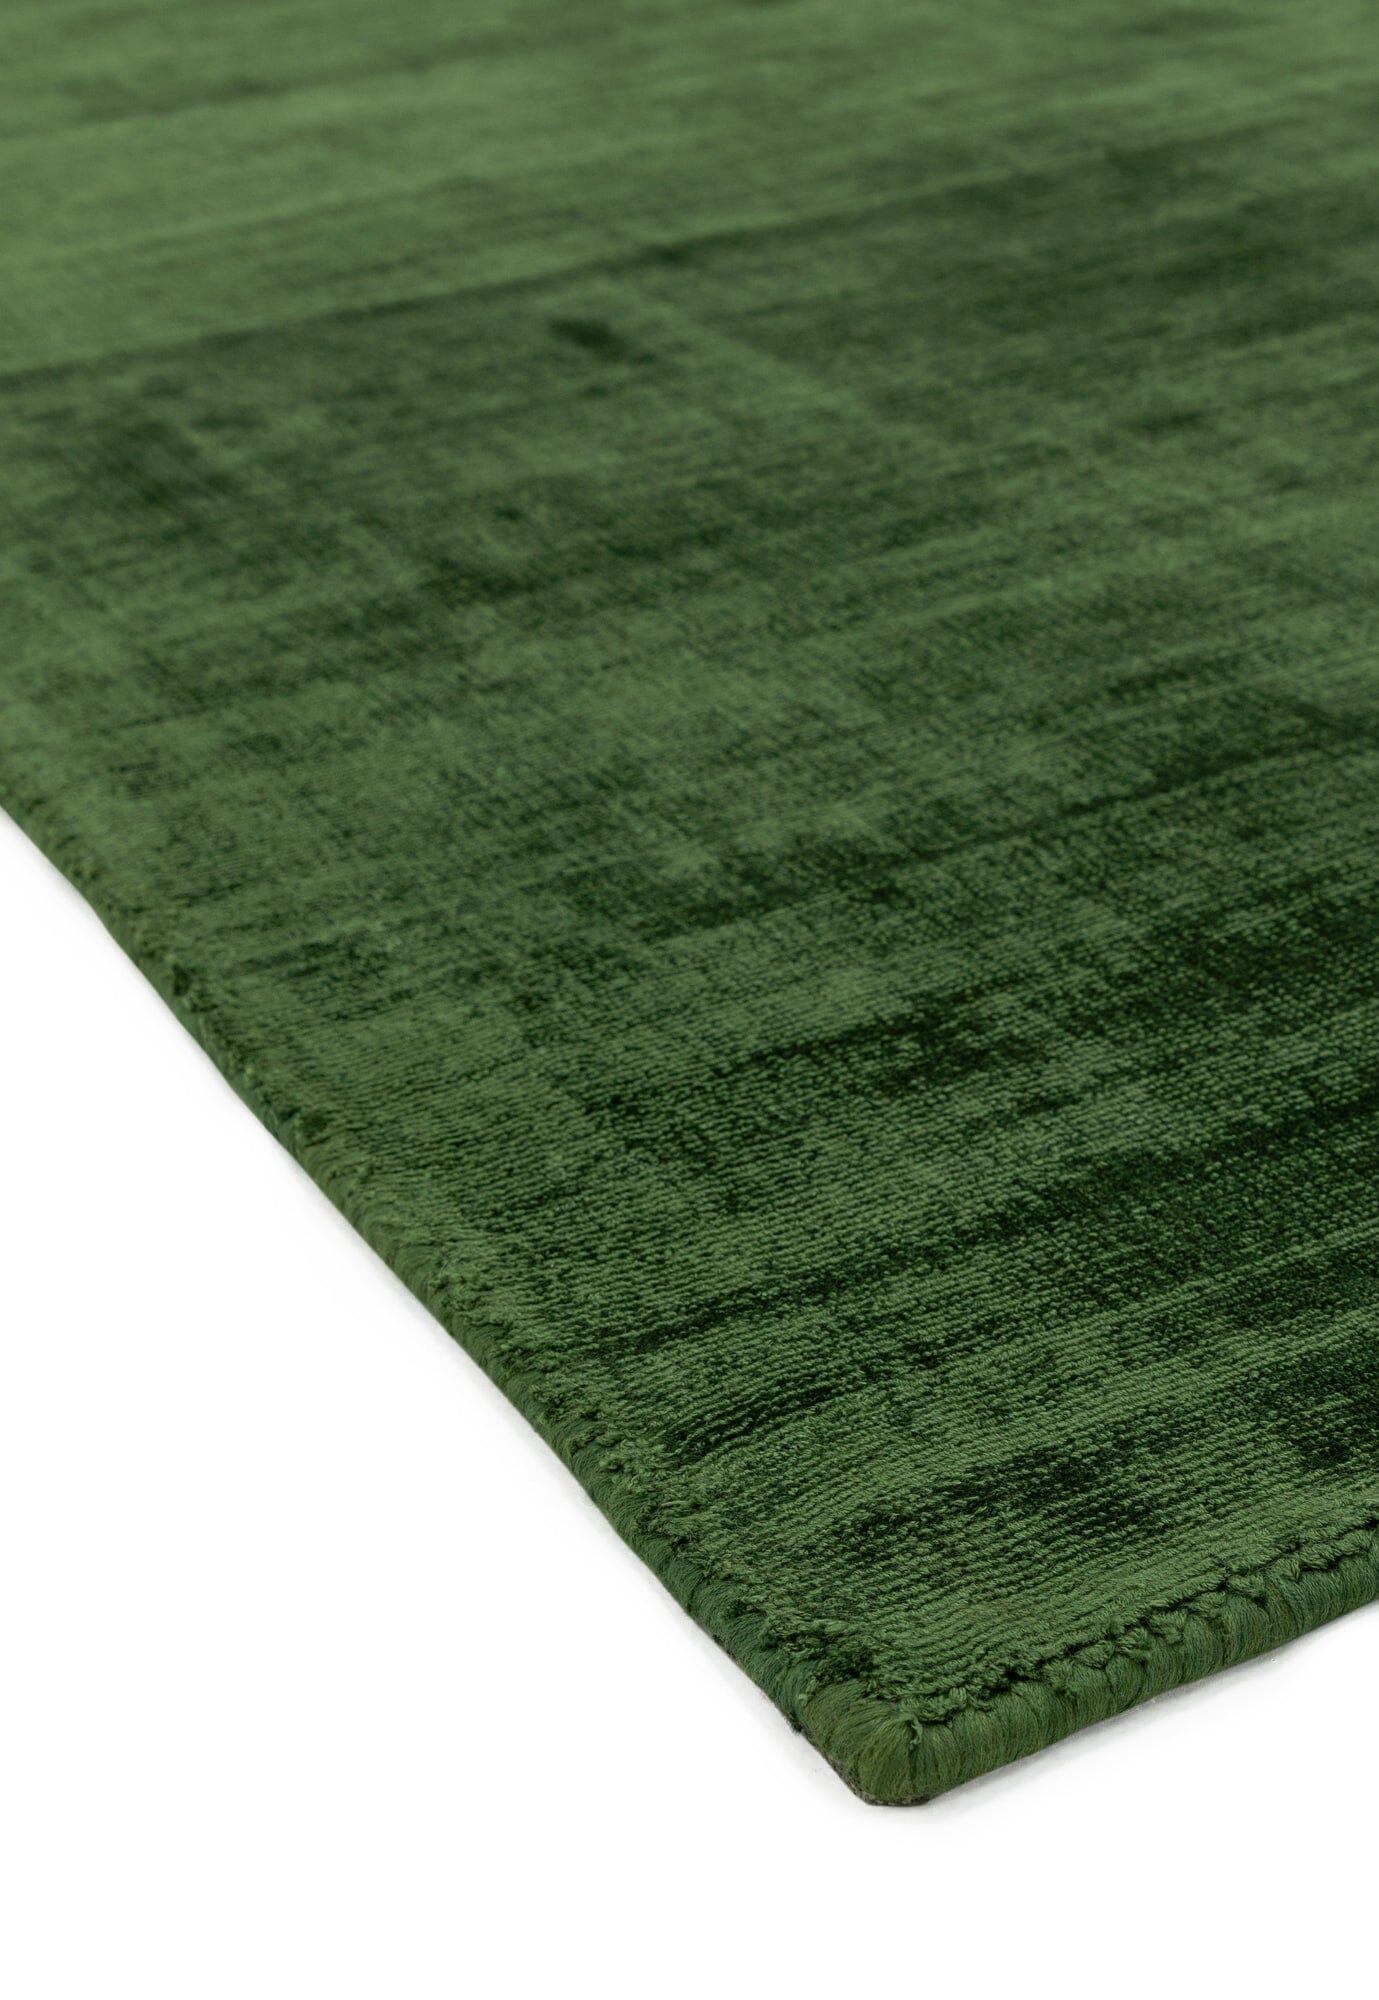  Asiatic Carpets-Asiatic Carpets Blade Hand Woven Rug Green - 240 x 340cm-Green 485 